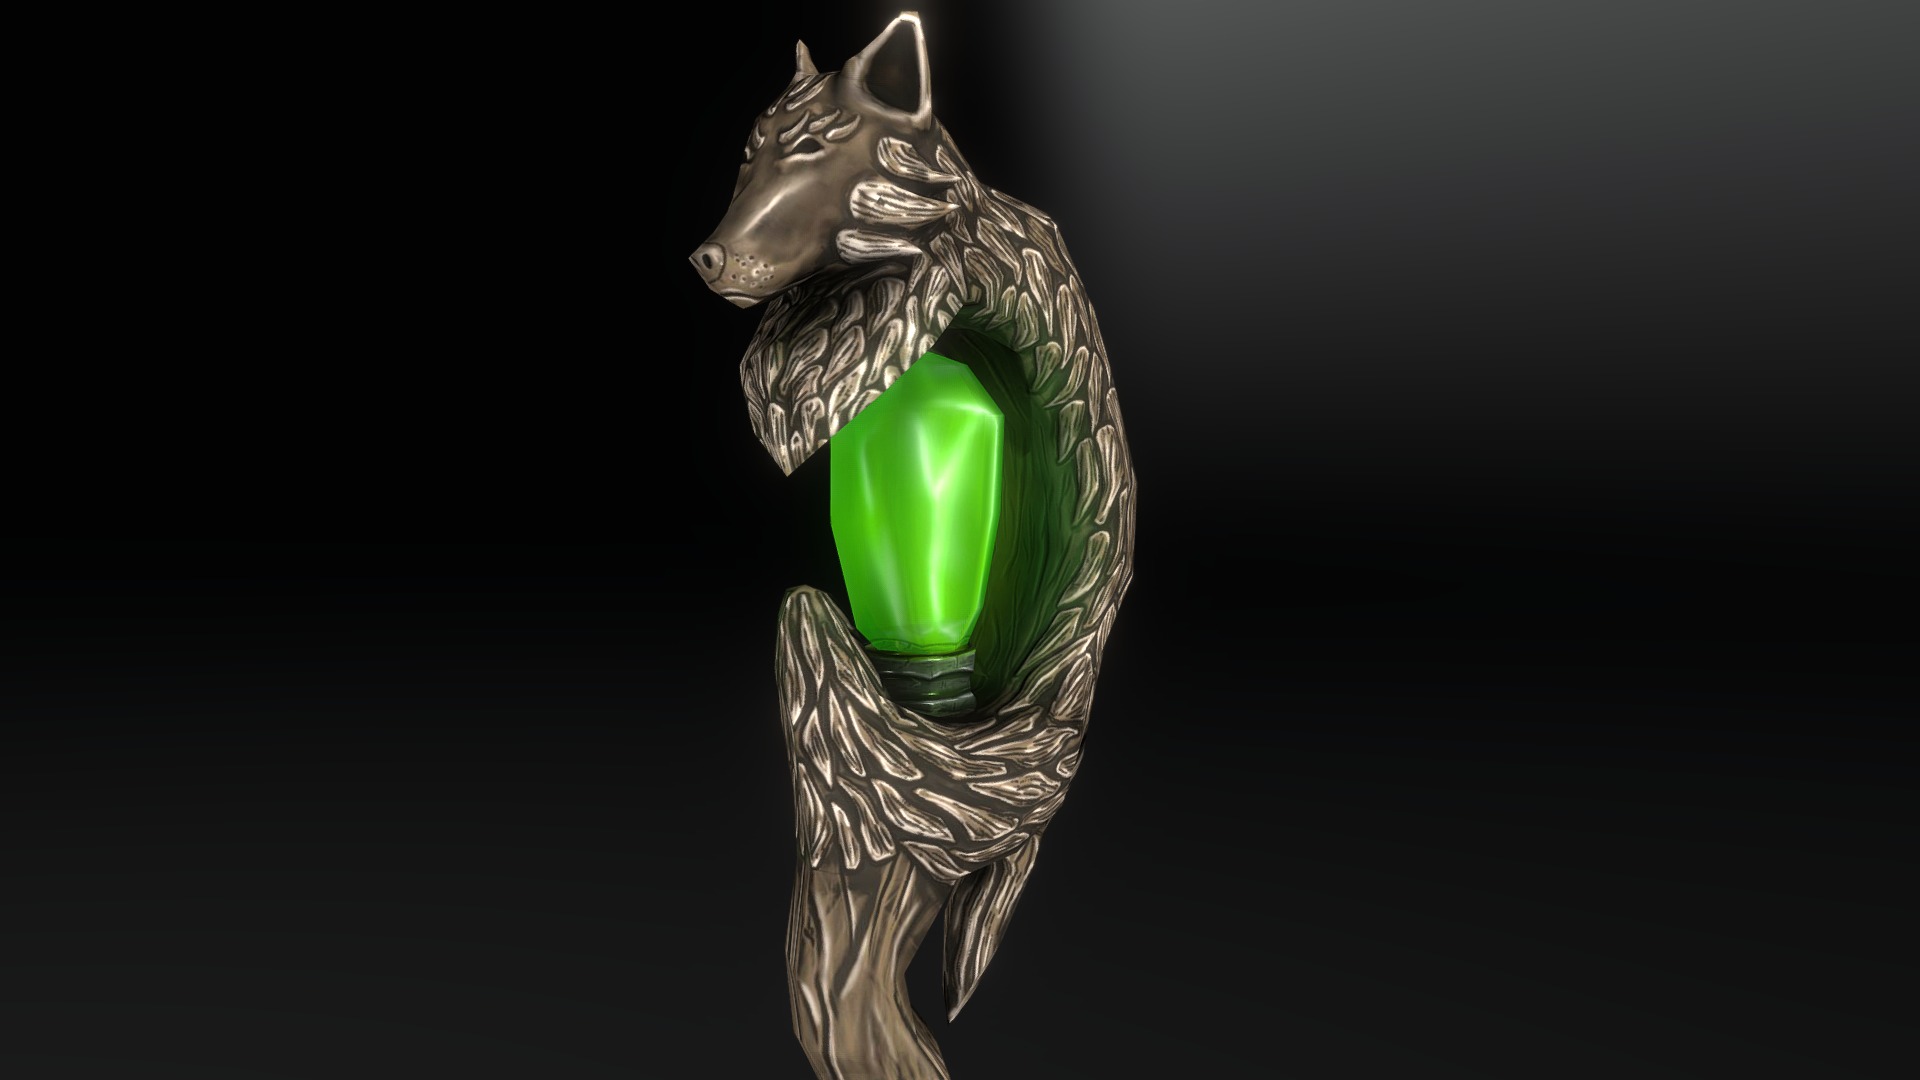 3D model Game Magic Staff 1 - This is a 3D model of the Game Magic Staff 1. The 3D model is about a statue of a wolf holding a glowing green object.